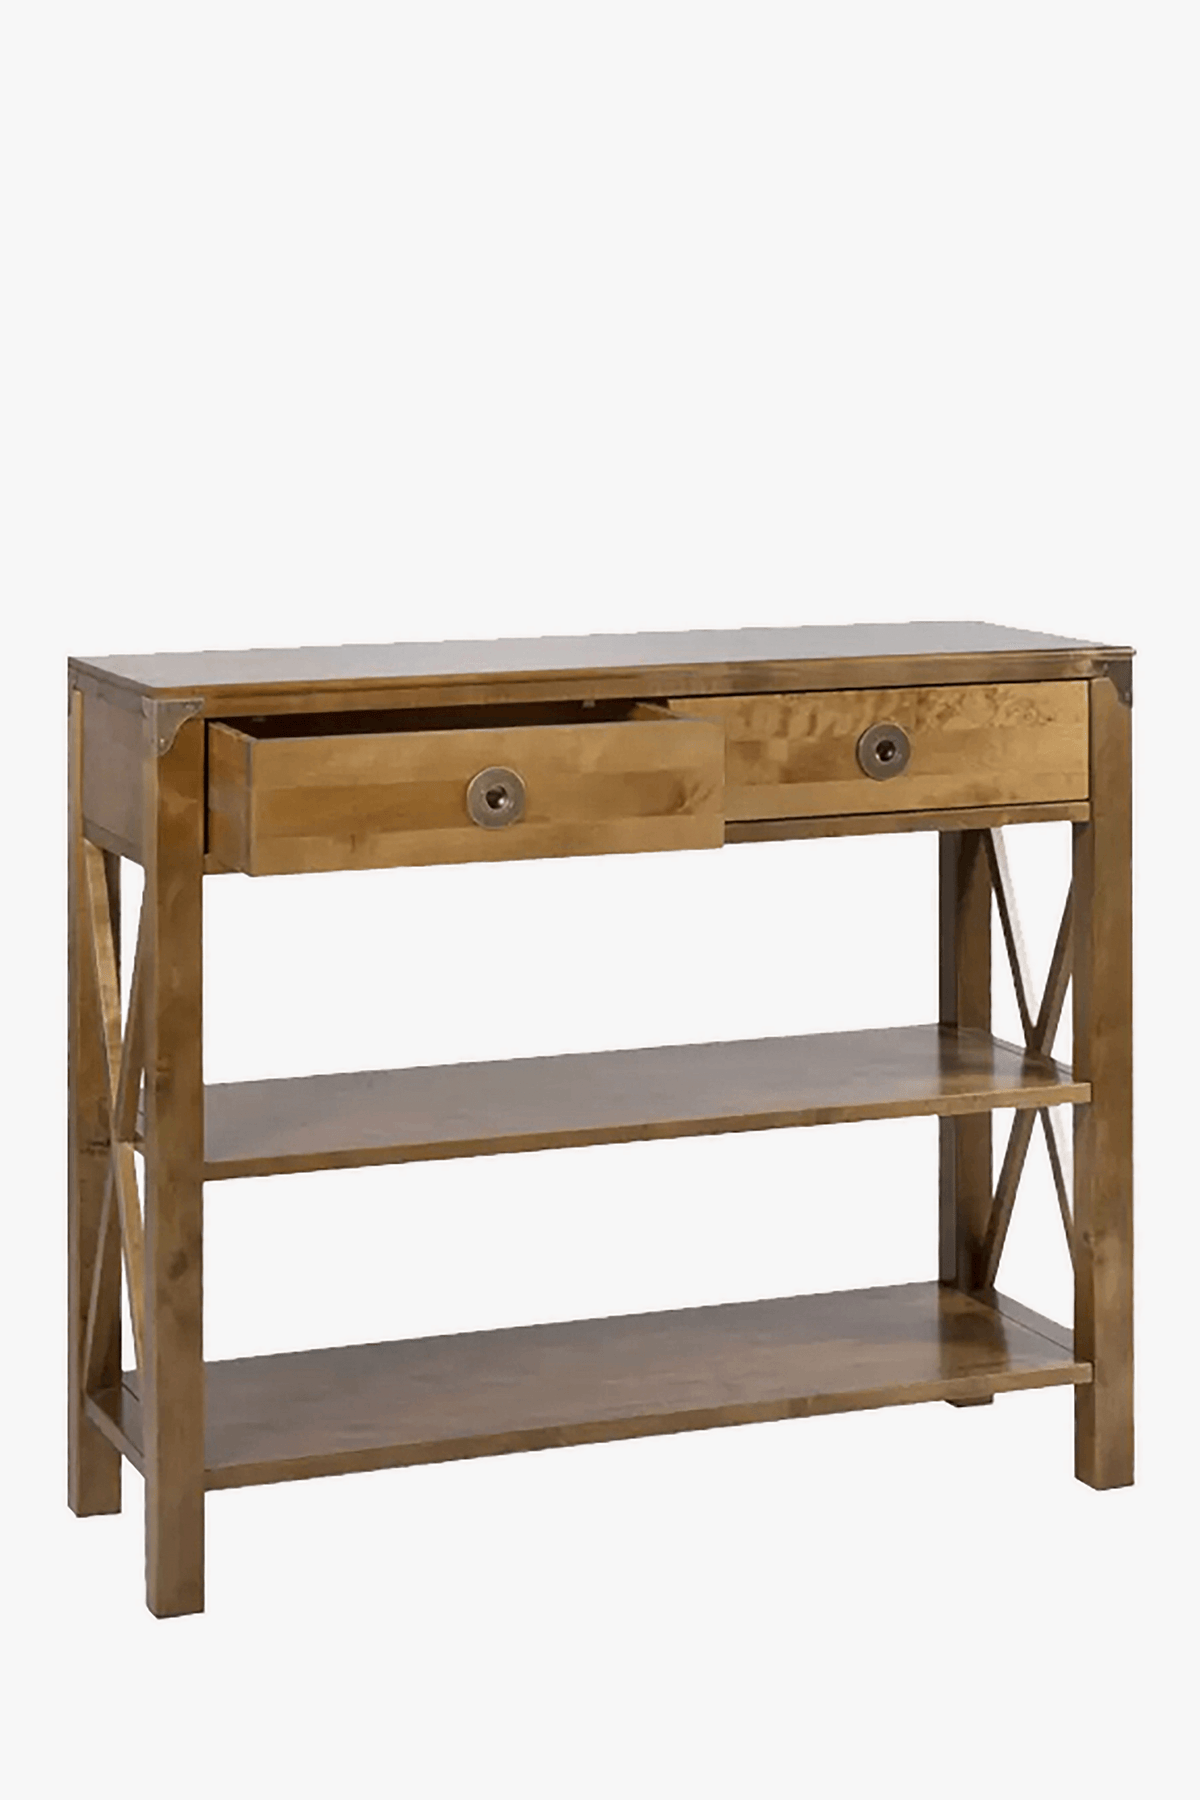 Balmoral 2 Drawer Console Table